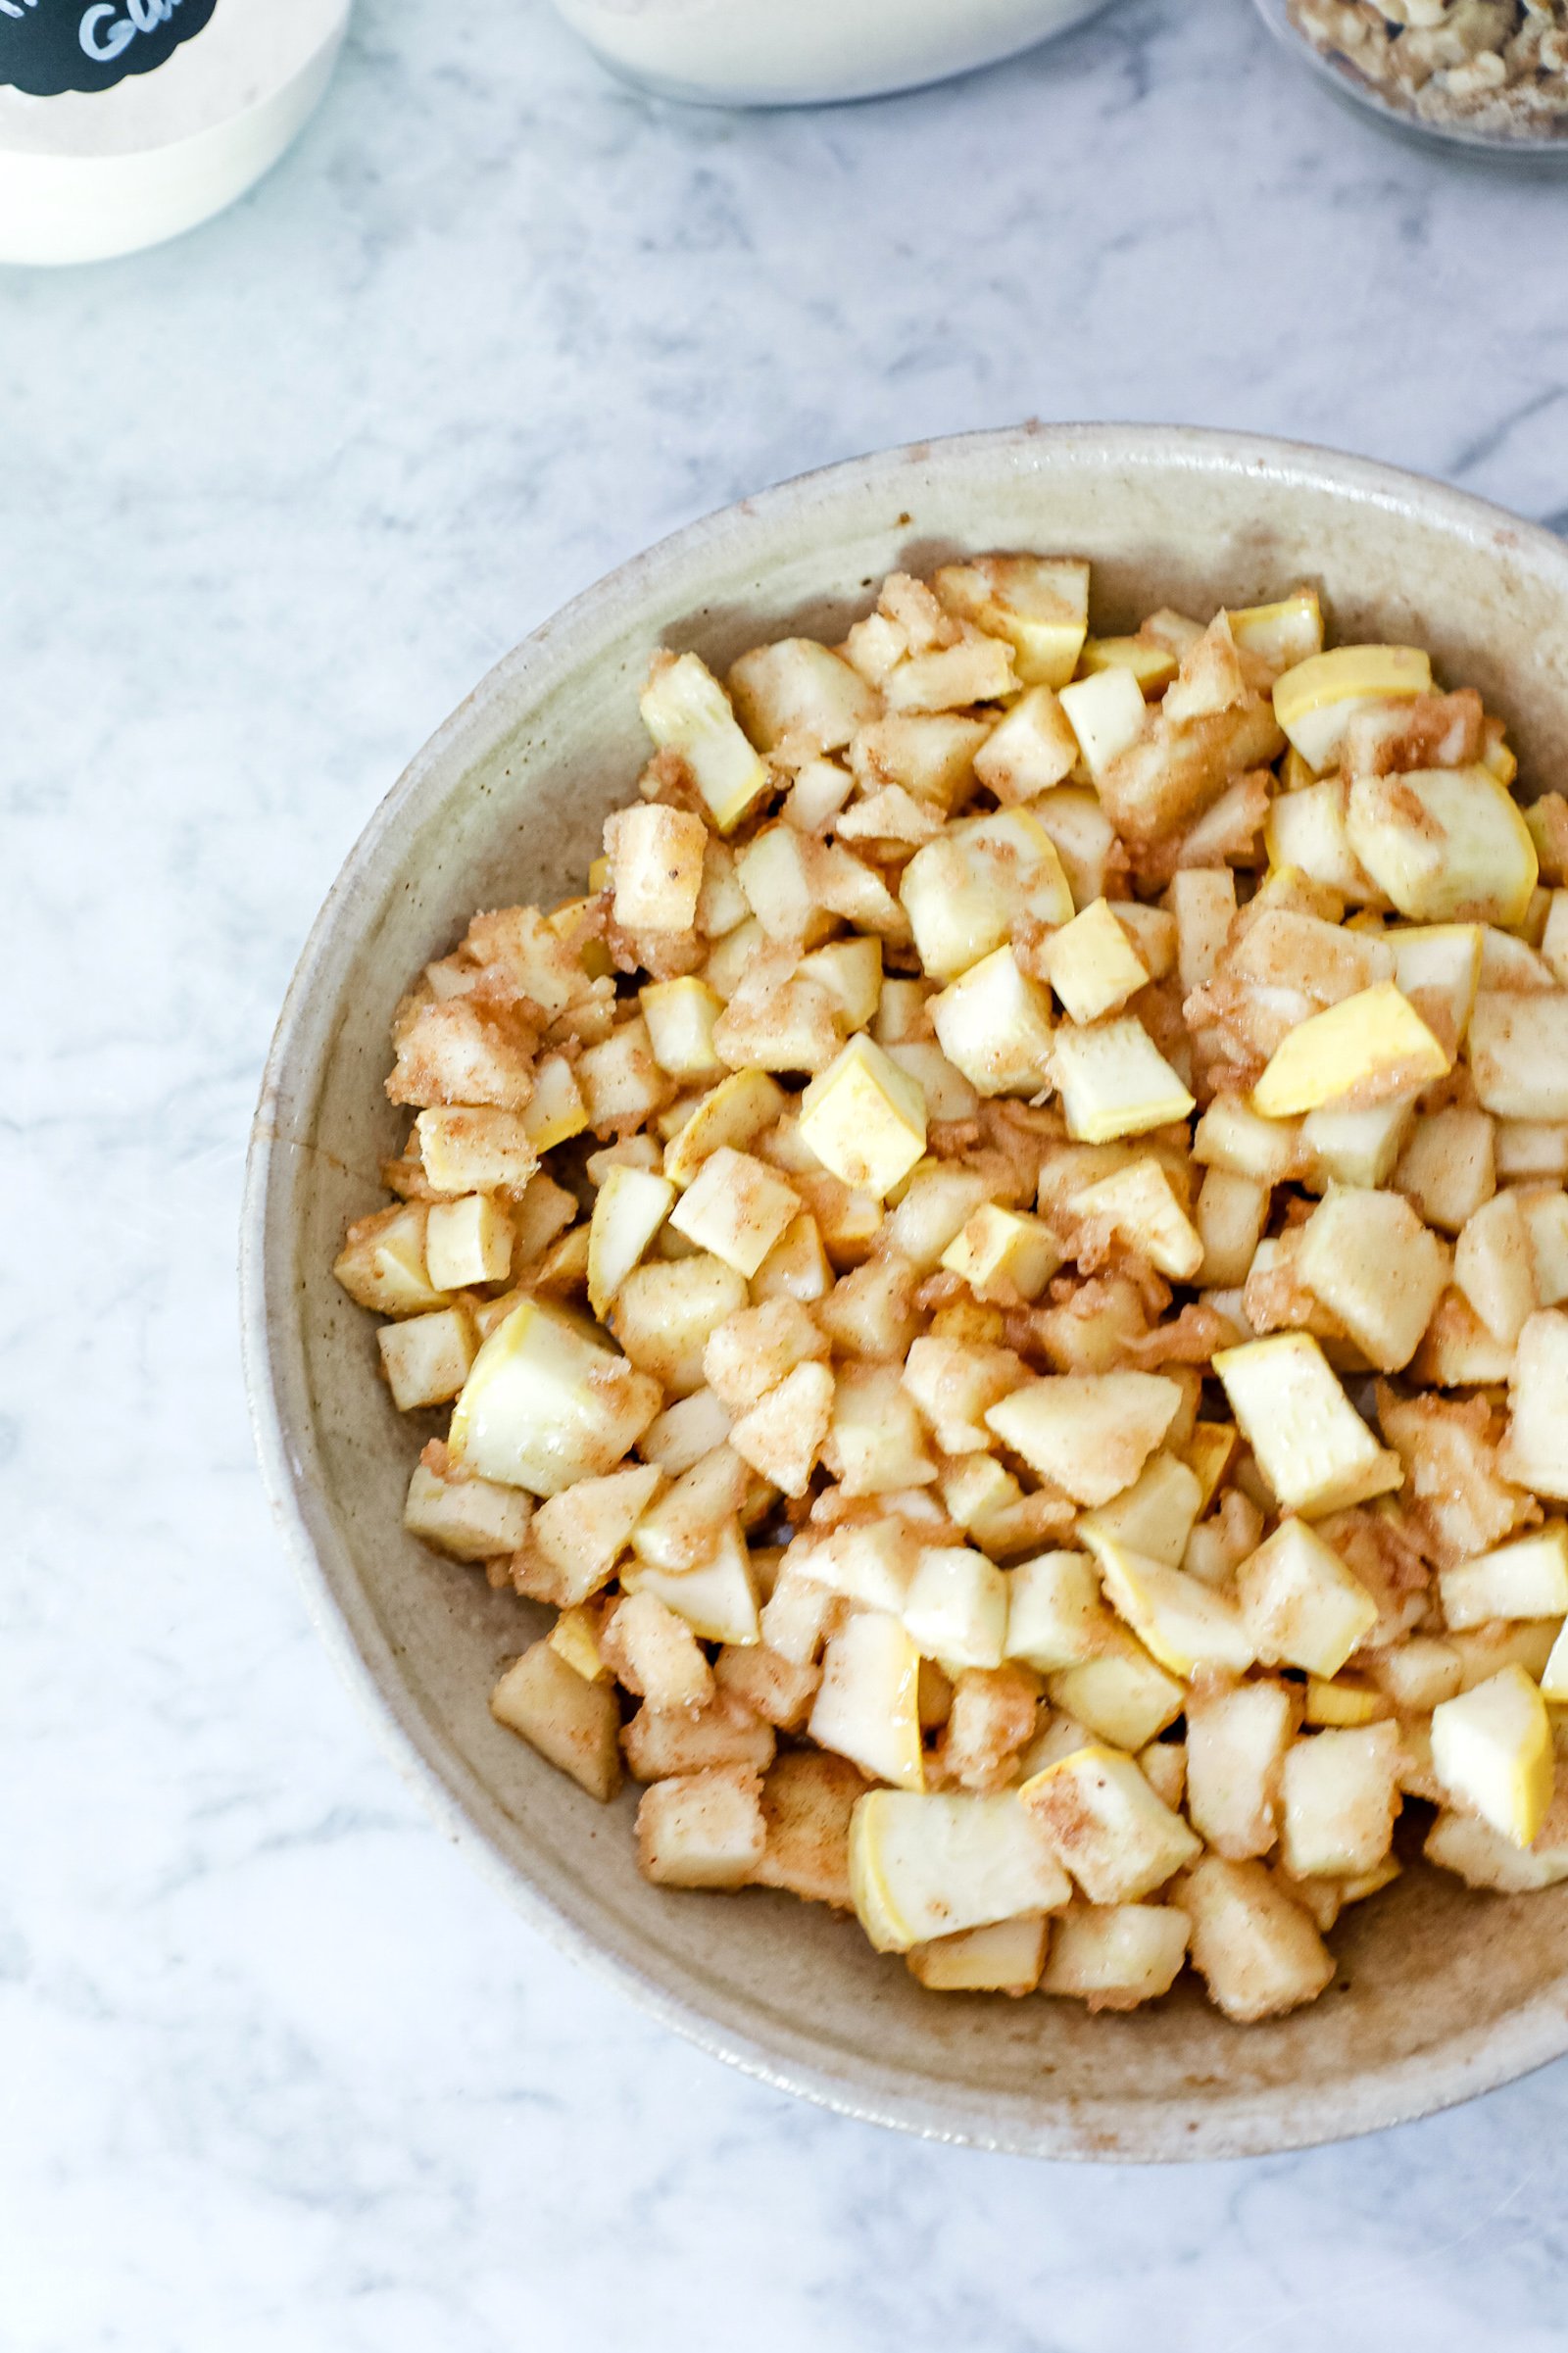 chopped and seasoned apples and squash ready to bake i